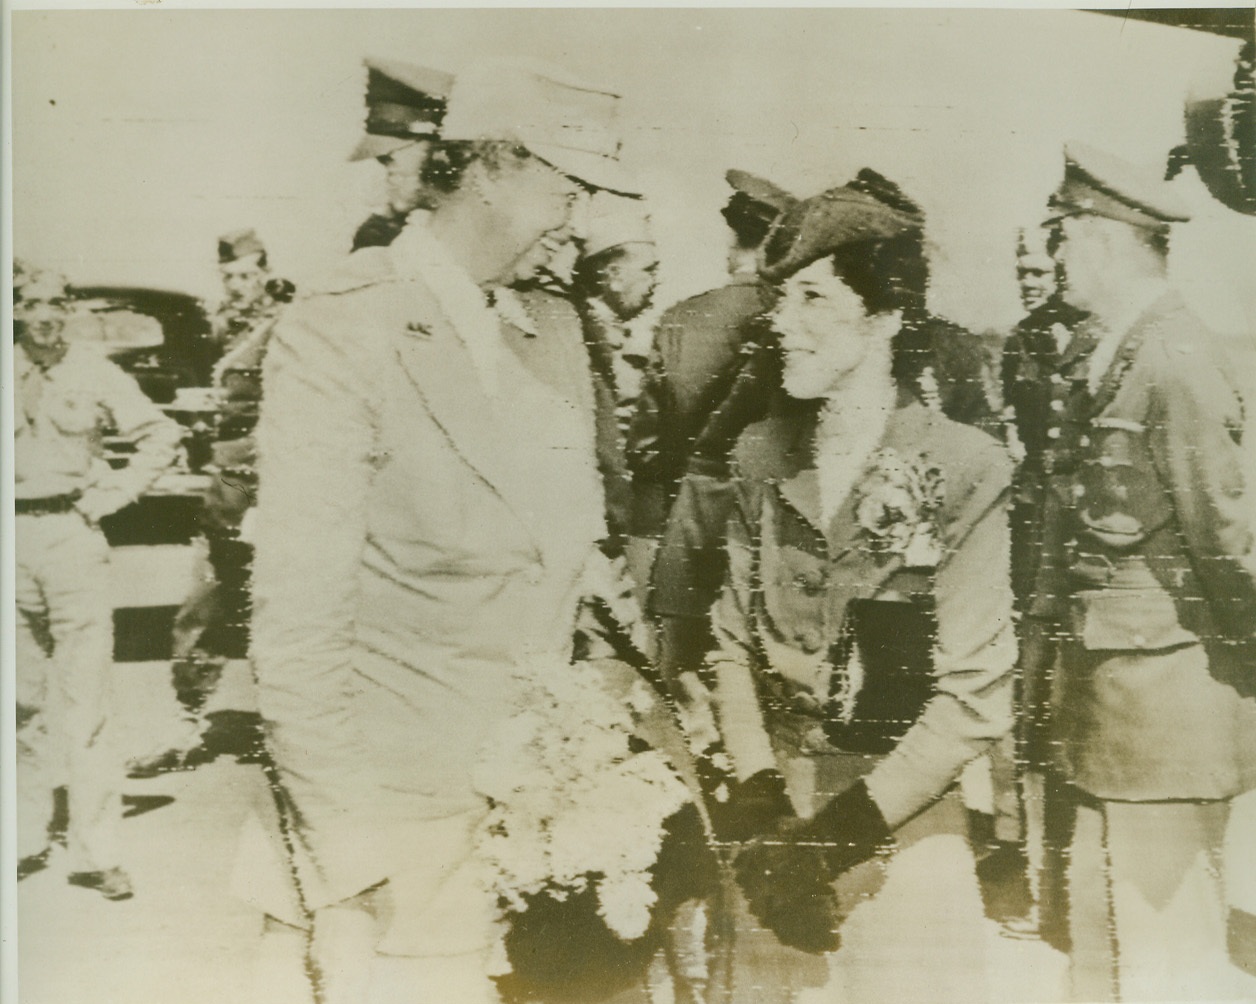 Mrs. Macarthur Greets Mrs. Roosevelt, 9/20/1943. Somewhere in South Australia—The wives of two of America’s great leaders met when Mrs. Douglas Macarthur (right) greeted Mrs. Franklin D. Roosevelt when the latter arrived at an airport somewhere in South Australia. Credit: Signal Corps radiotelephoto from ACME.;